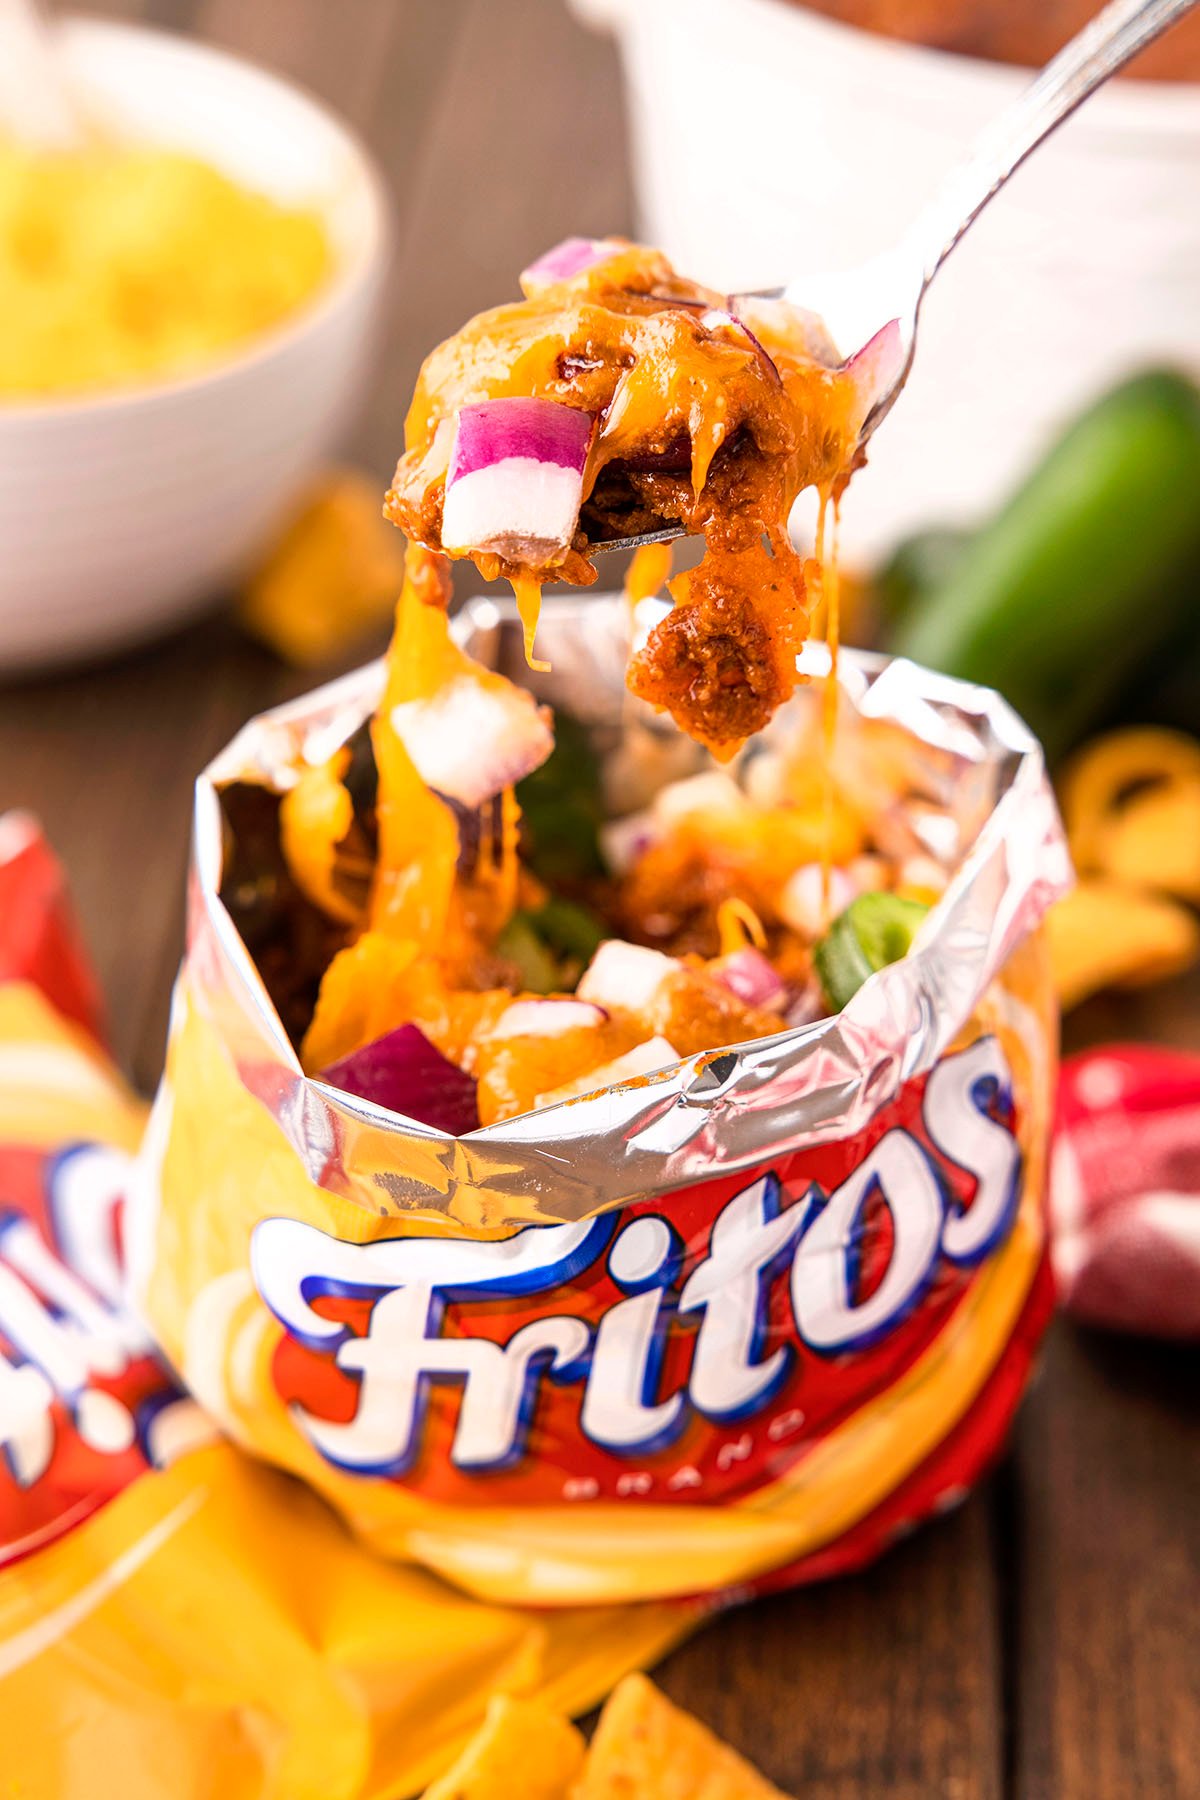 fritos pie recipe served in corn chips bag with fork taking a bite out.